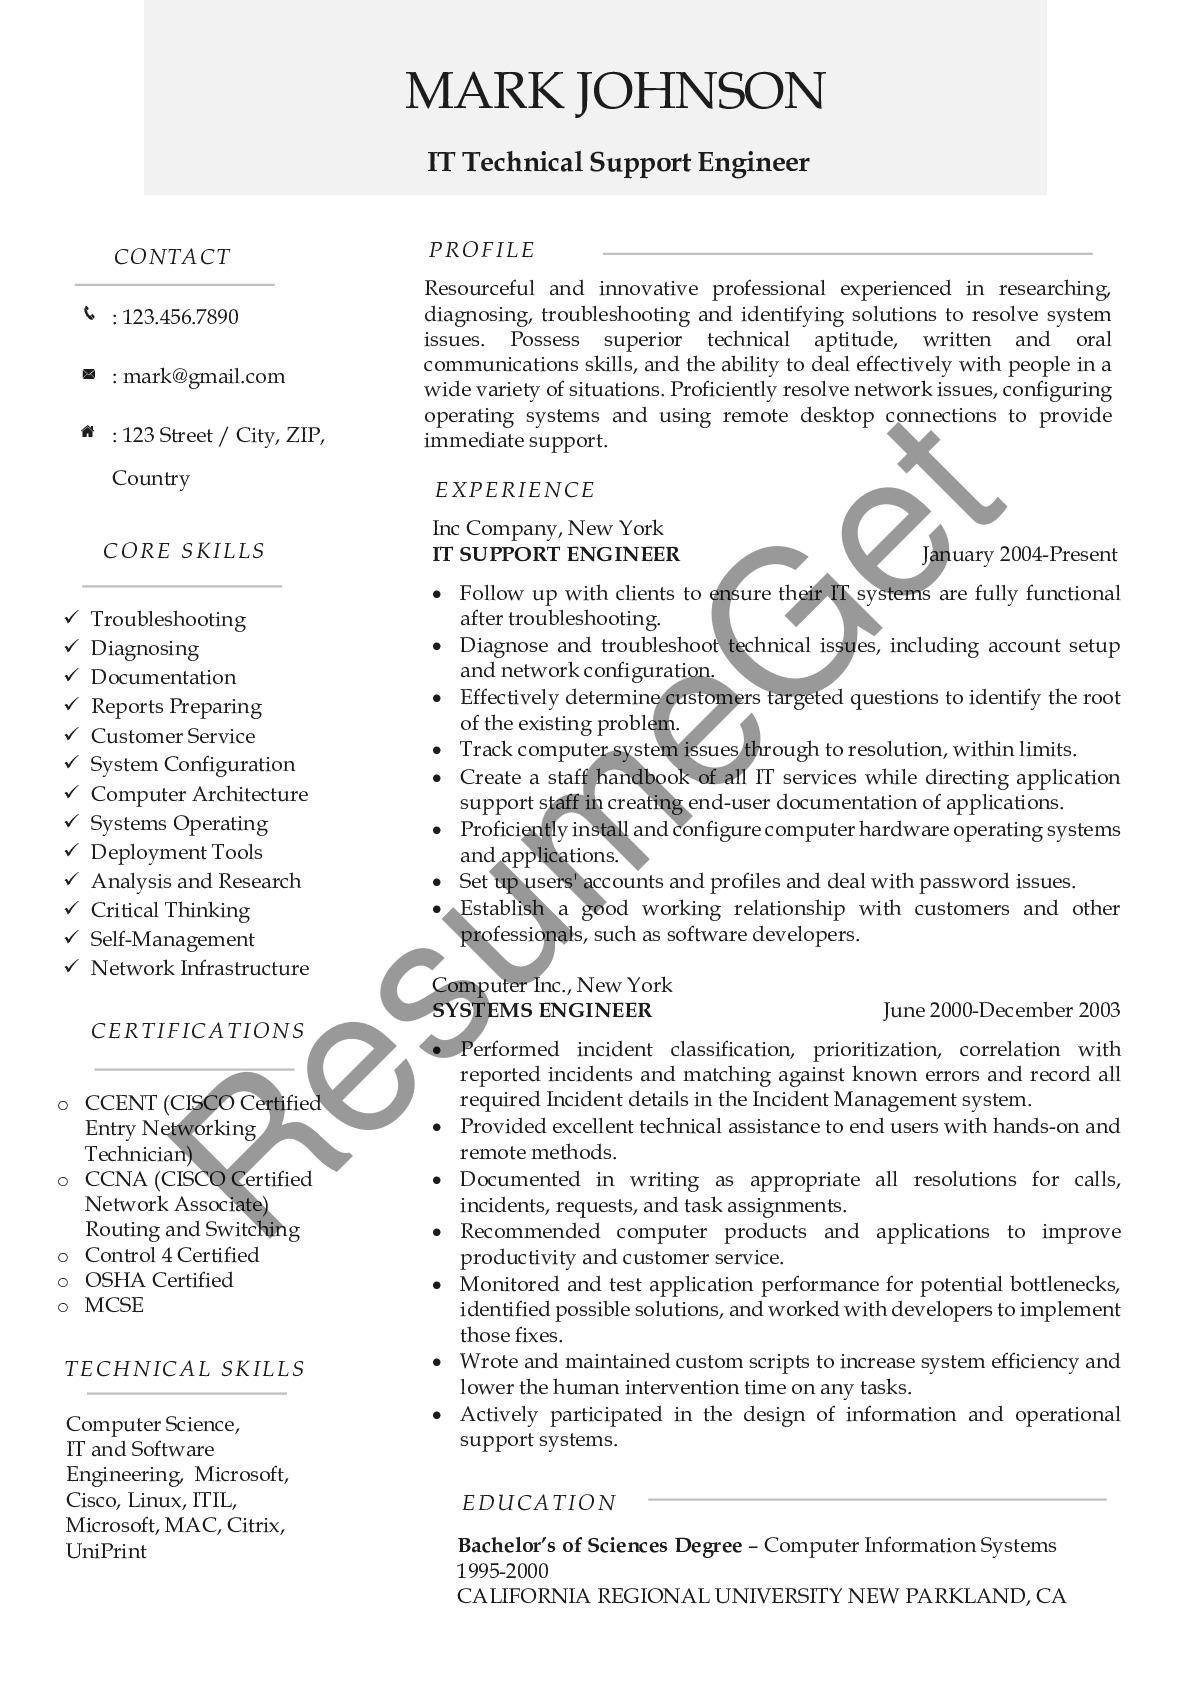 IT Technical Support Engineer Resume Example